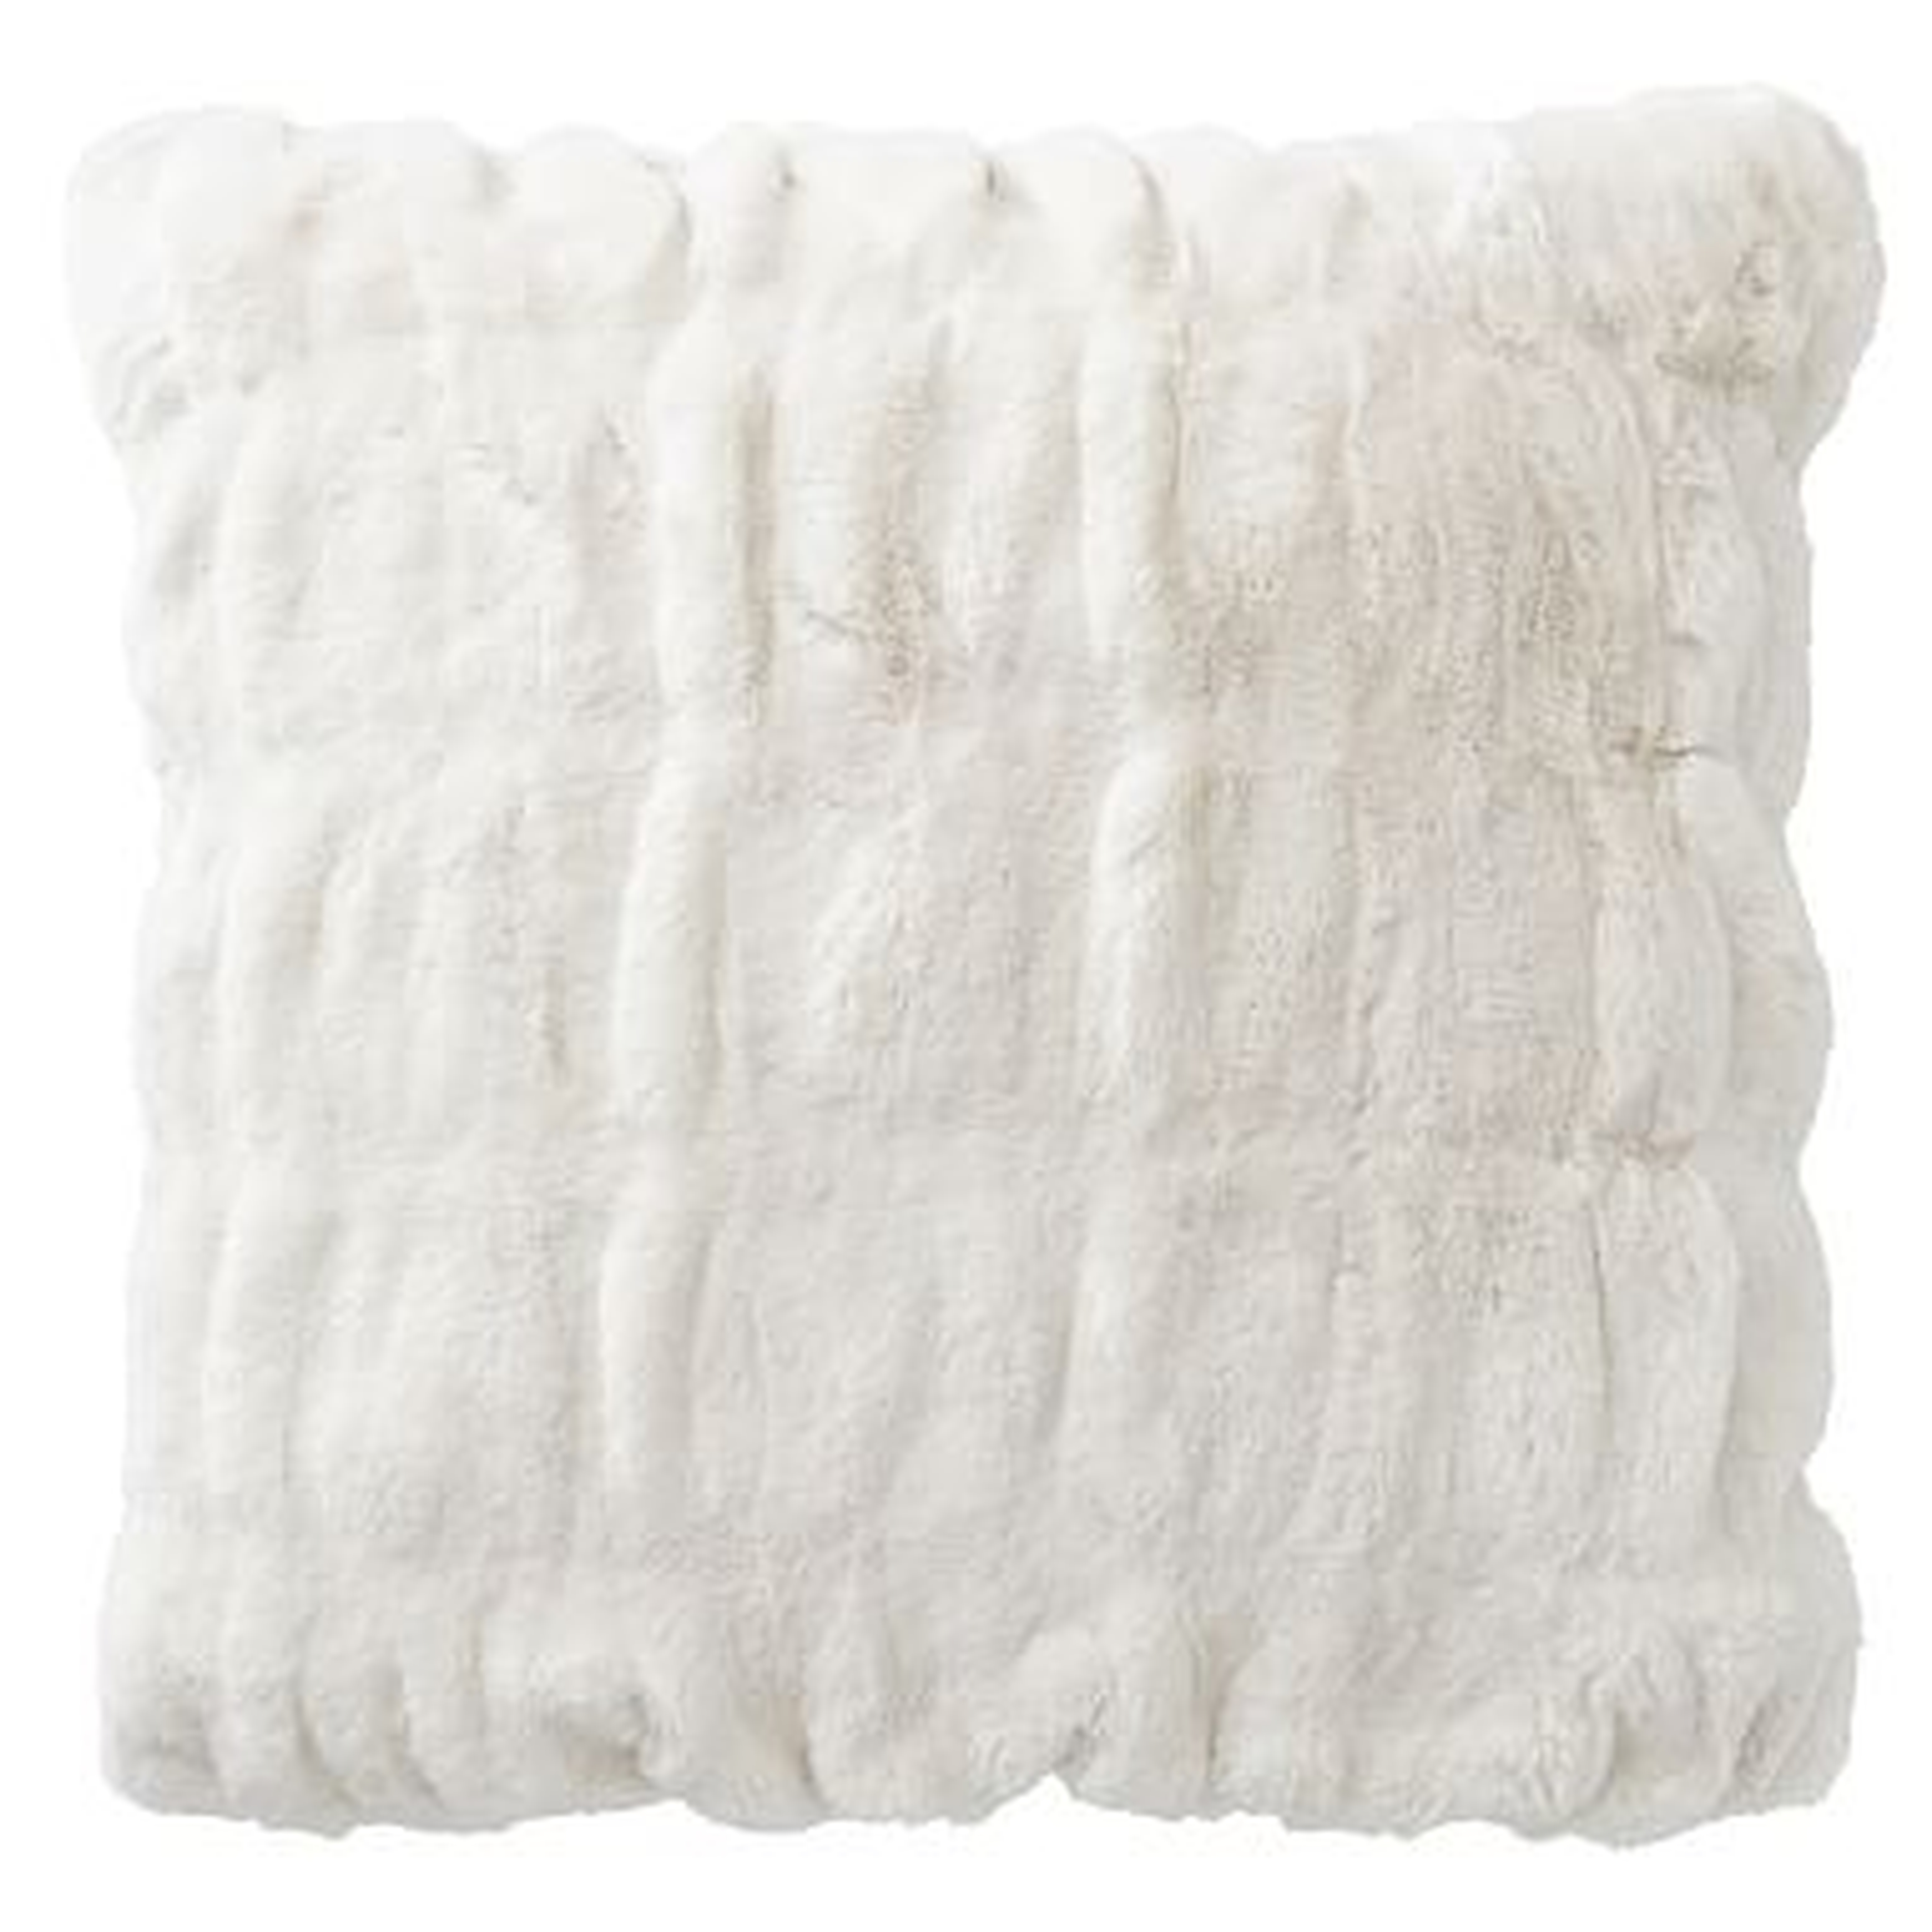 Faux-Fur Pillow Cover, 18x18, Ruched Ivory - Pottery Barn Teen